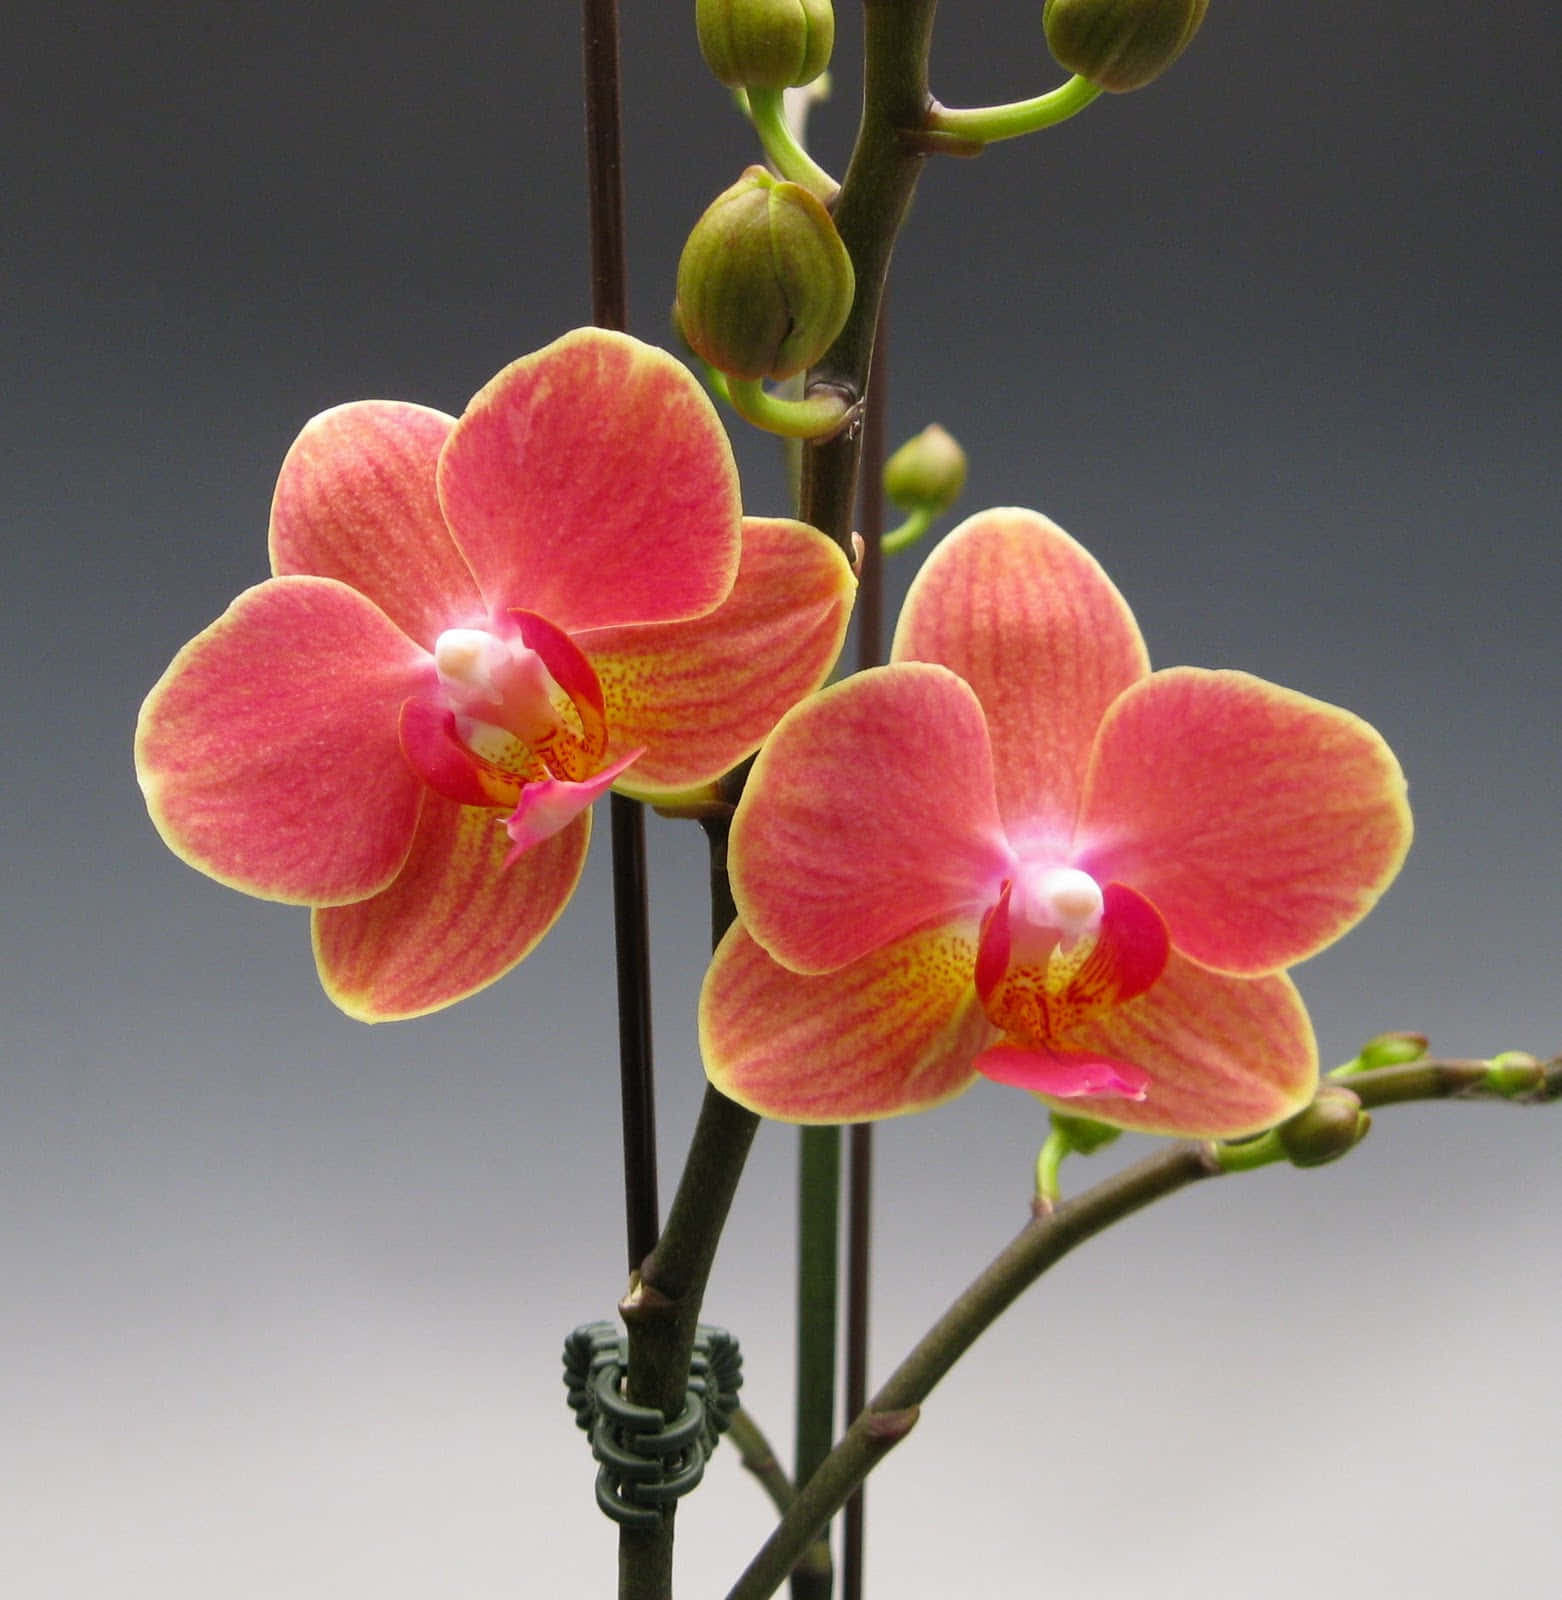 Two Pink Orchids In A Vase On A Gray Background